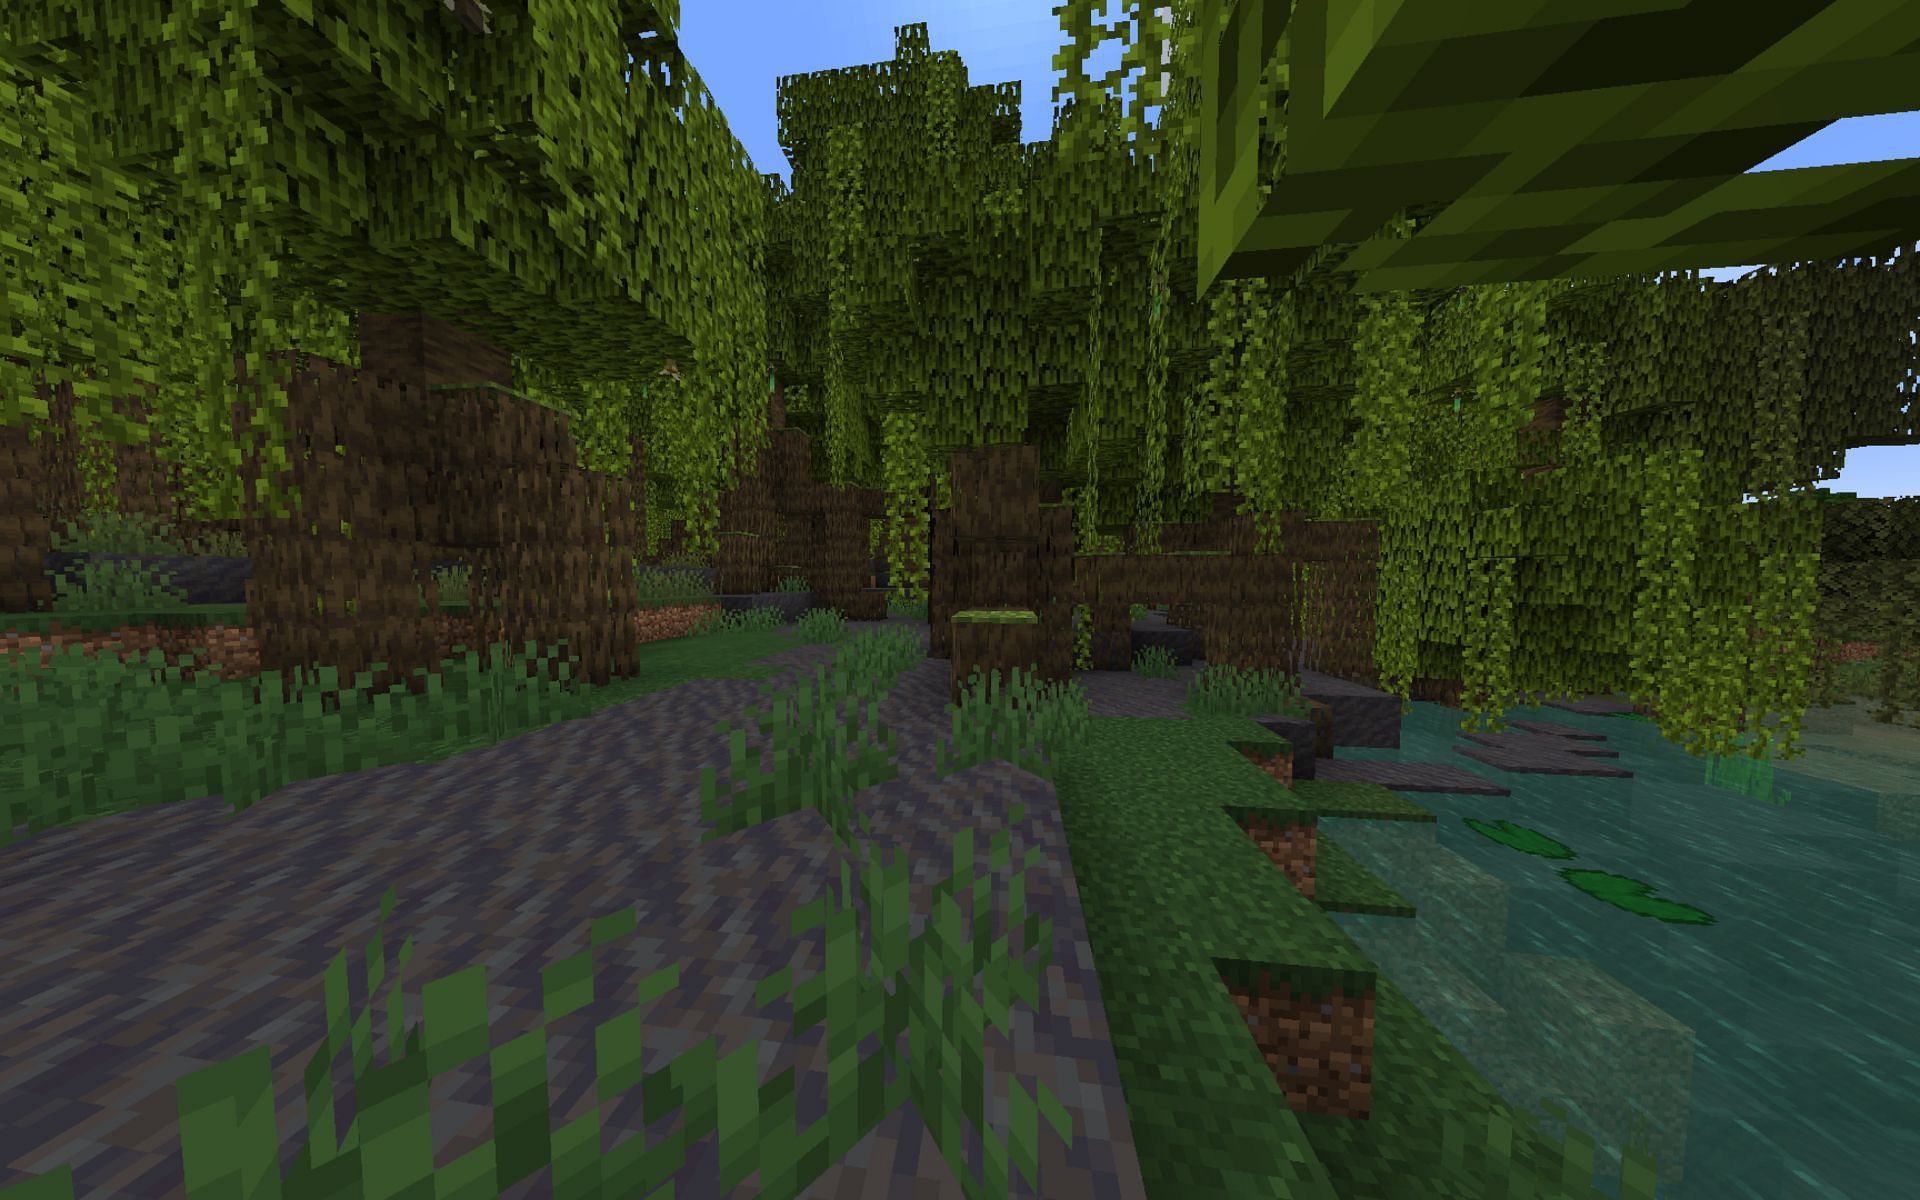 The Mangrove biome in which the player spawns (Image via Minecraft)